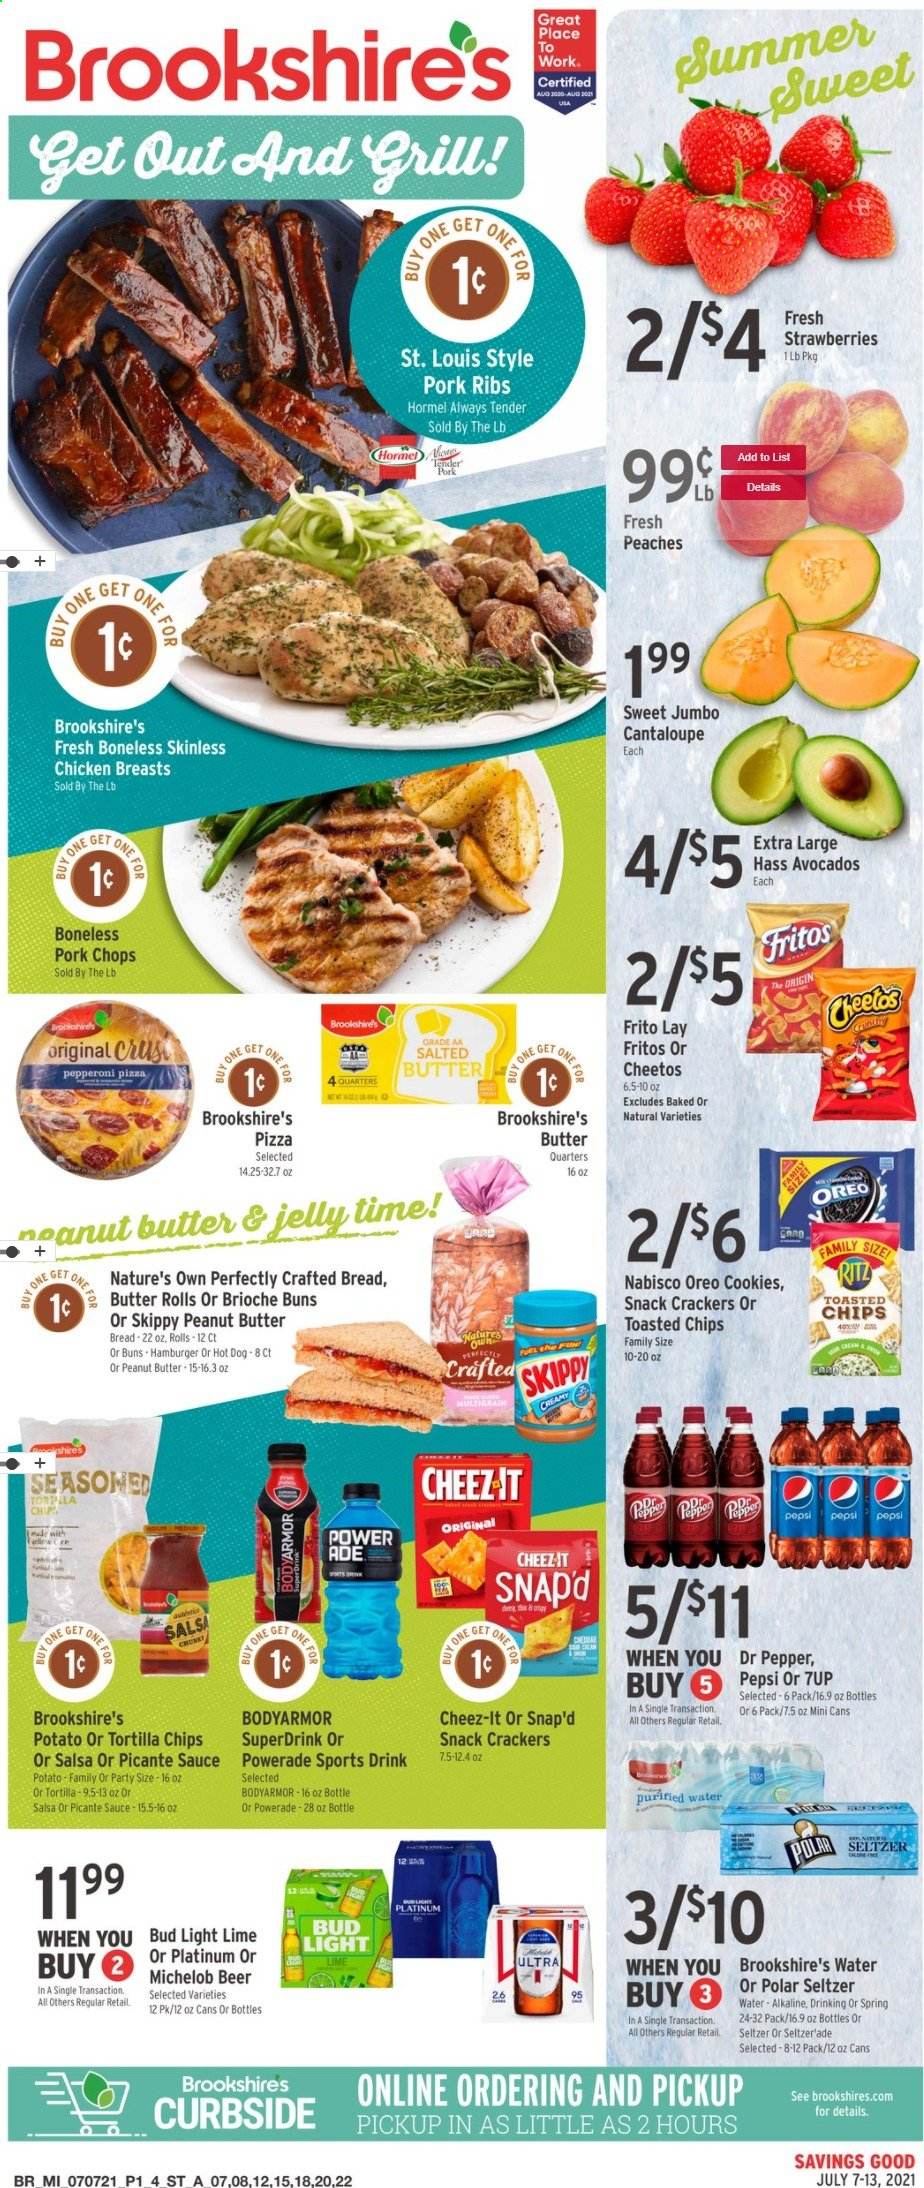 thumbnail - Brookshires Flyer - 07/07/2021 - 07/13/2021 - Sales products - Michelob, buns, brioche, cantaloupe, avocado, strawberries, hot dog, pizza, hamburger, sauce, Hormel, pepperoni, Oreo, salted butter, cookies, snack, jelly, crackers, RITZ, Fritos, tortilla chips, Cheetos, chips, Cheez-It, salsa, peanut butter, Powerade, Pepsi, Dr. Pepper, 7UP, seltzer water, purified water, beer, Bud Light, chicken breasts, pork chops, pork meat, pork ribs, Nature's Own, peaches. Page 1.